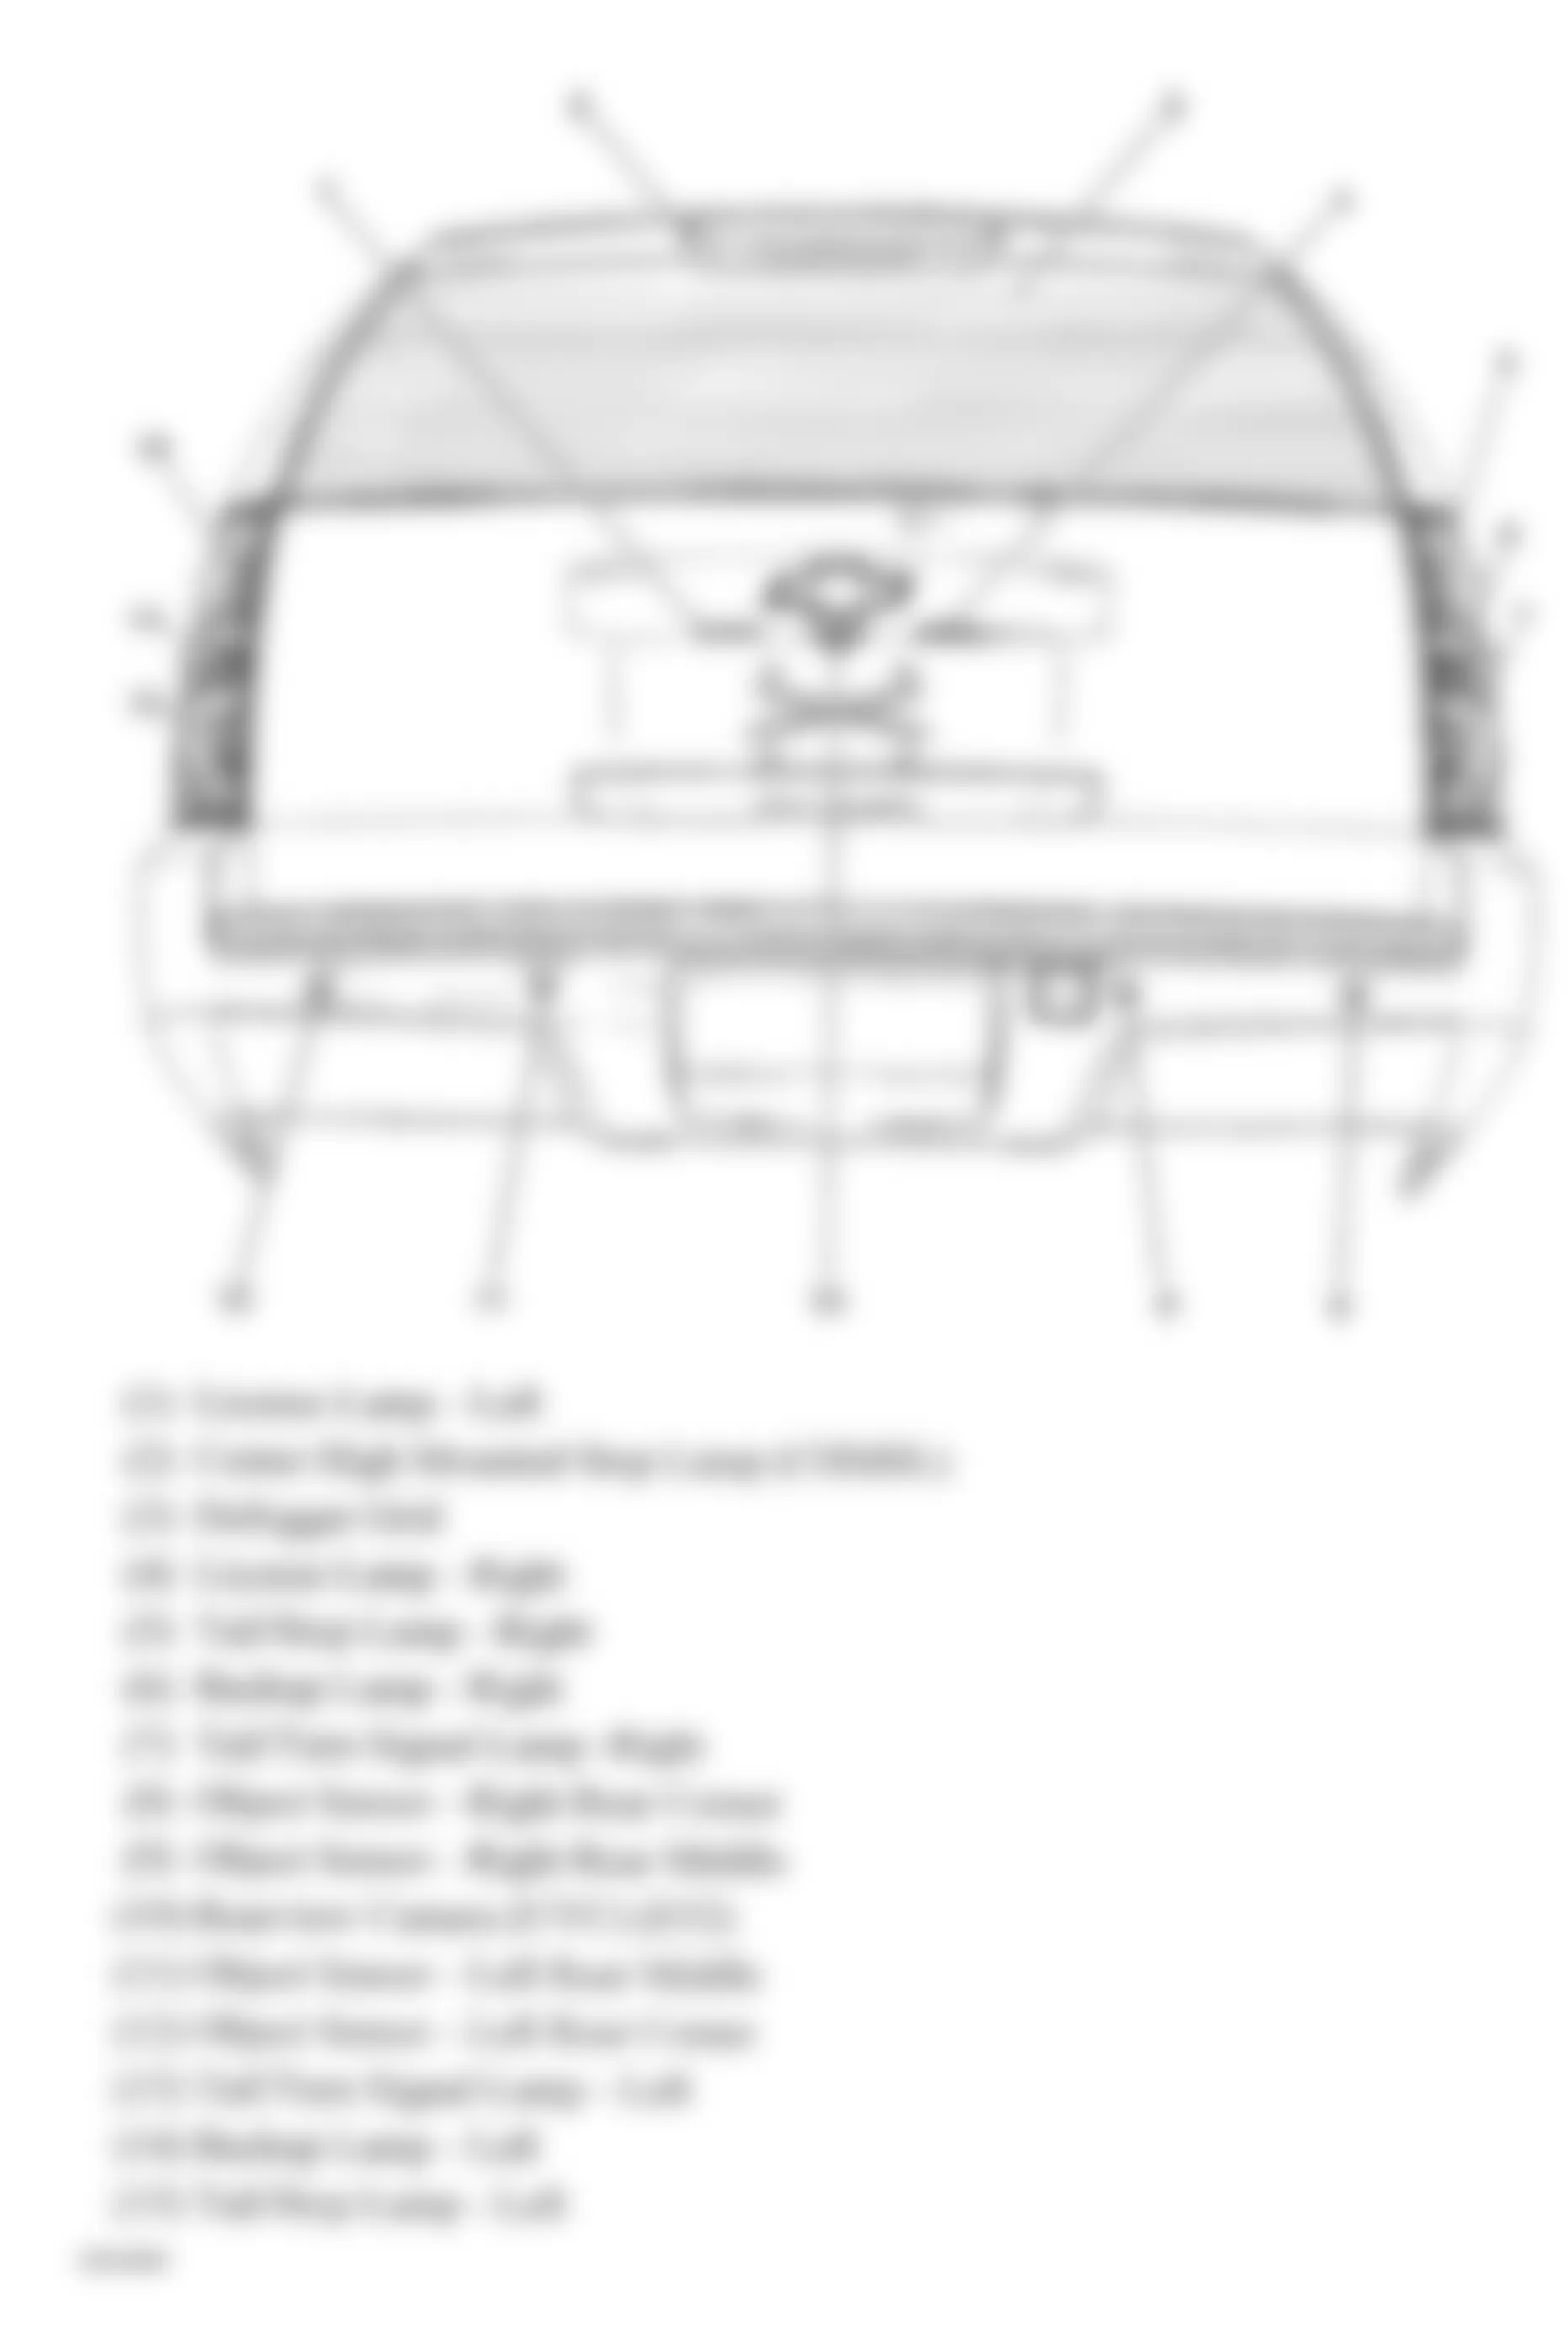 GMC Yukon XL K1500 2007 - Component Locations -  Rear Of Vehicle (Avalanche, Suburban & Tahoe W/One Piece Liftgate)